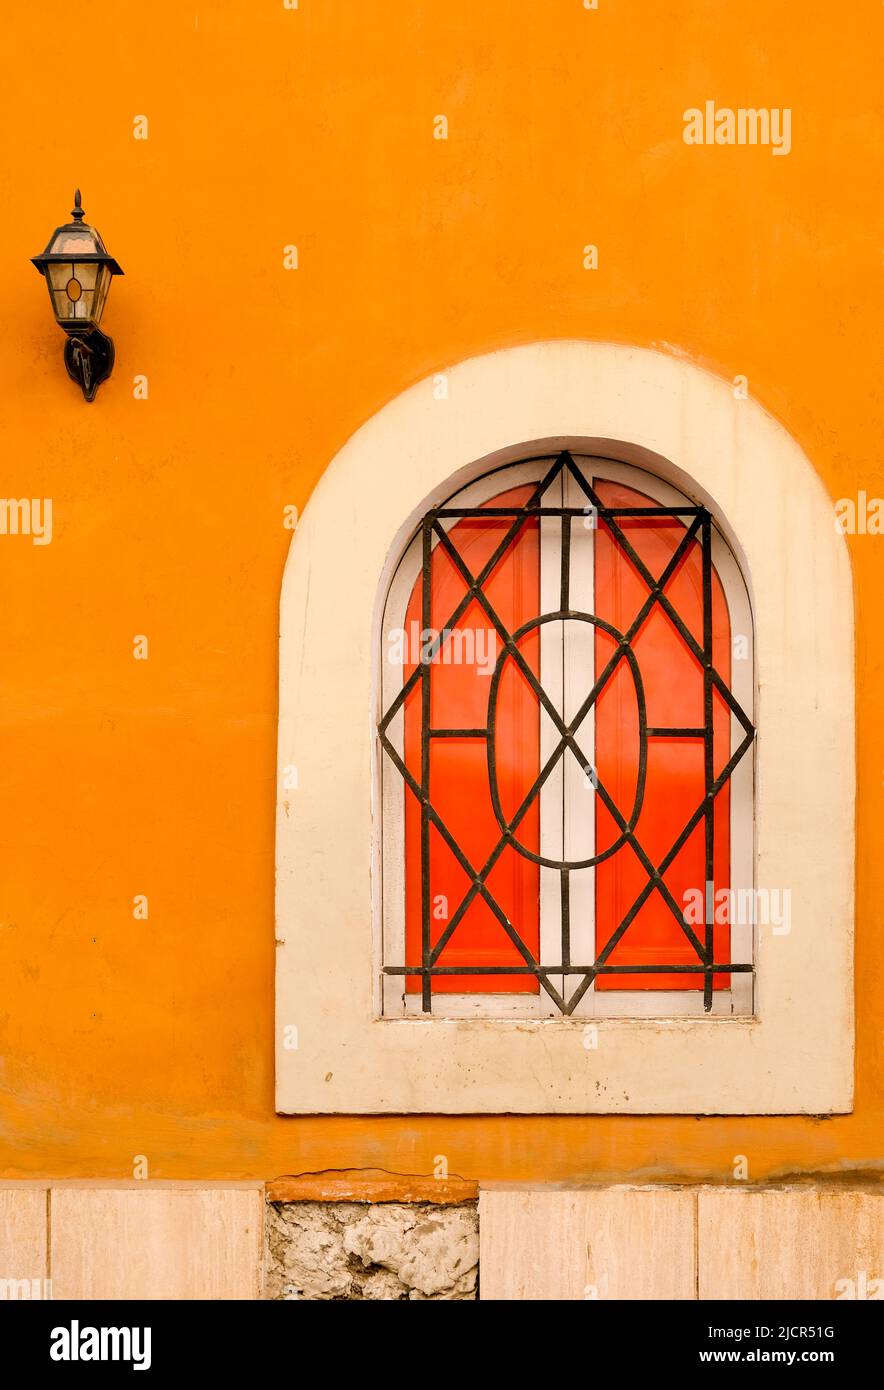 Shuttered, arched window with iron grate set in orange plaster wall in Rome, Italy. Stock Photo